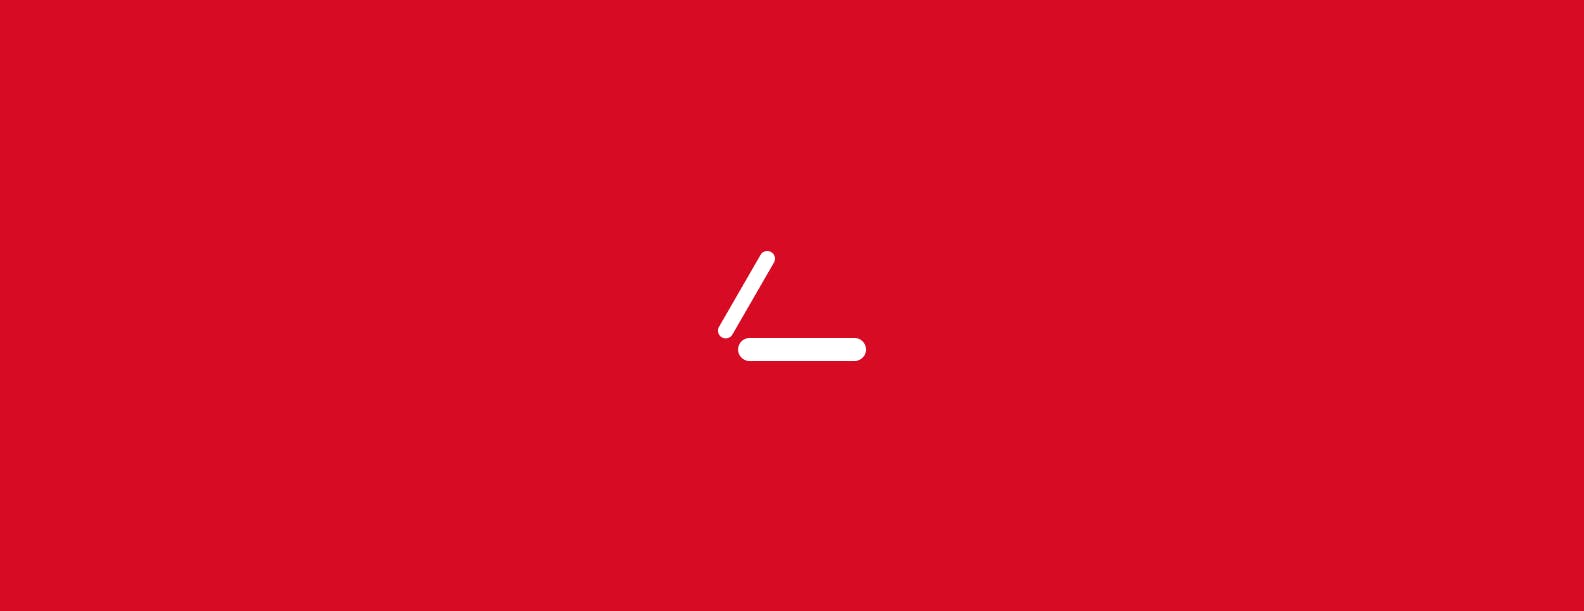 A white Laetro logo sitting on a red background